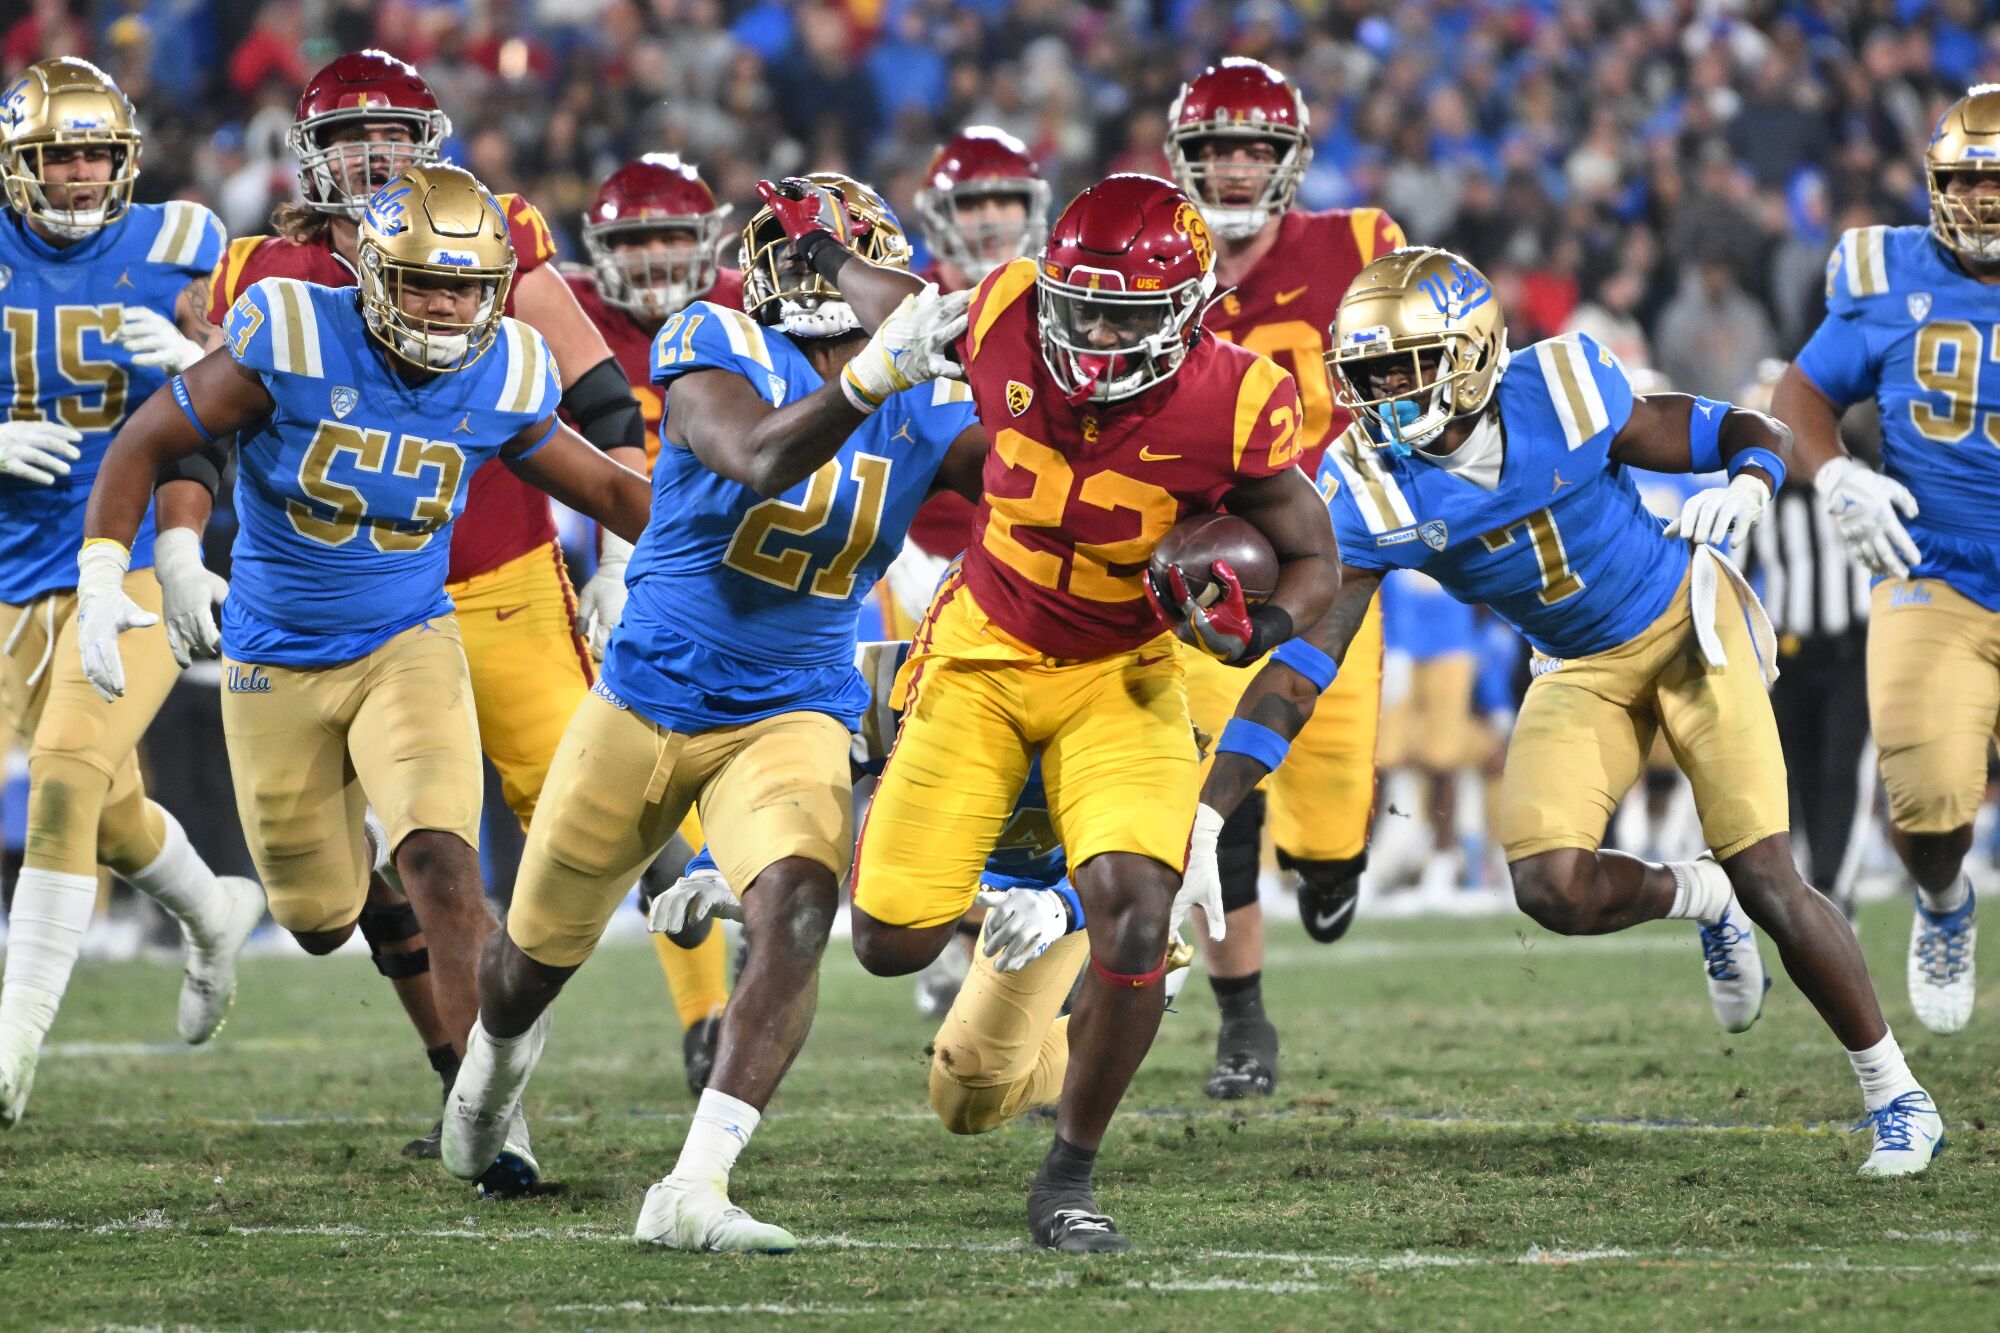 USC running back Darwin Barlow breaks free from the UCLA defense in the third quarter.